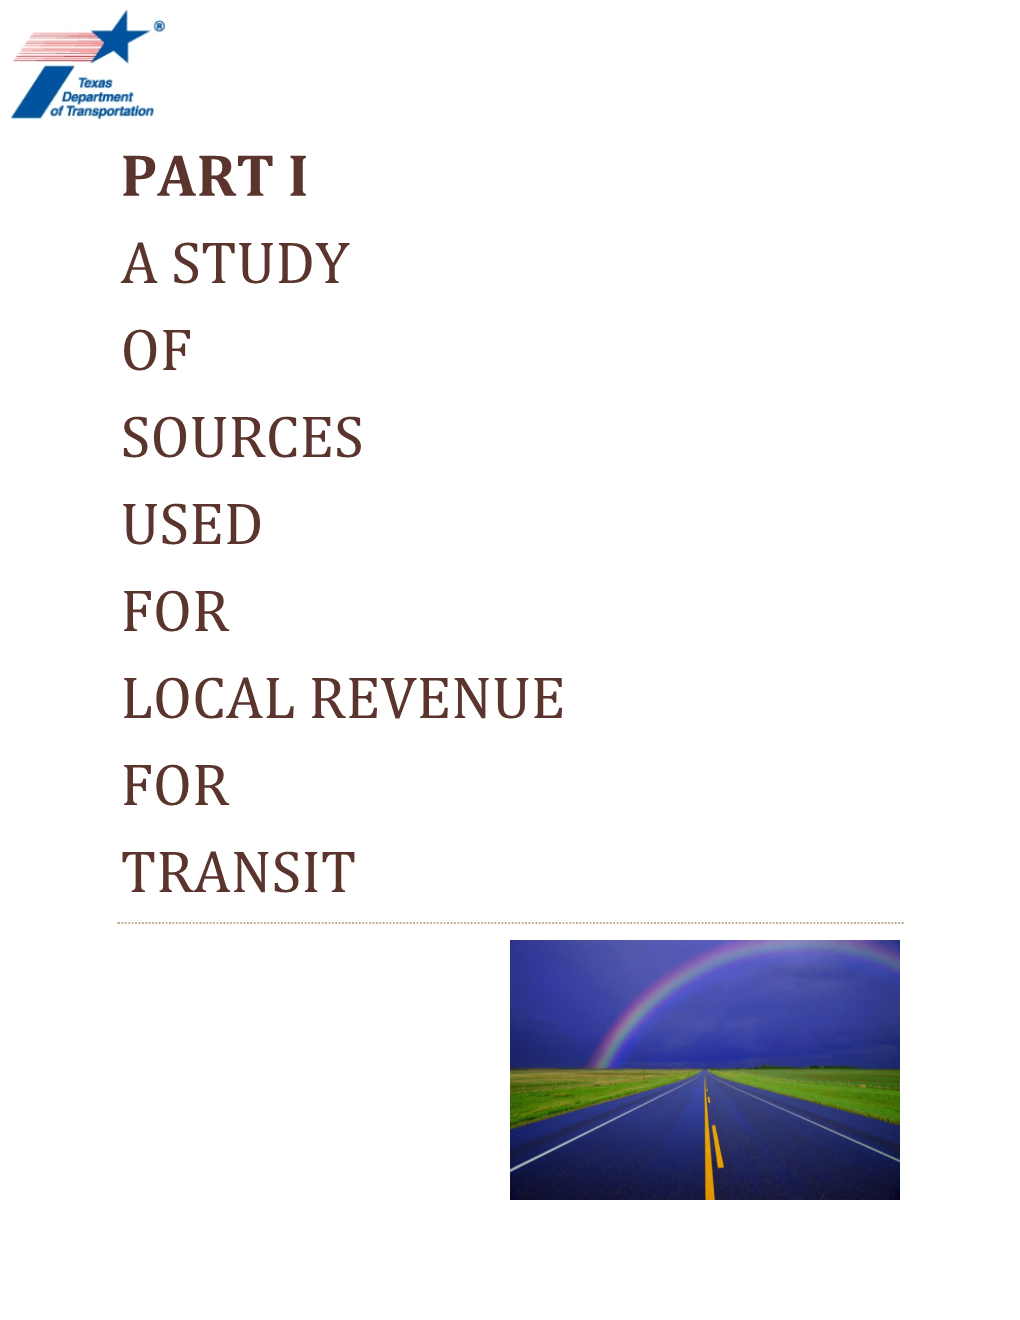 Study of Sources Used for Local Revenue for Transit